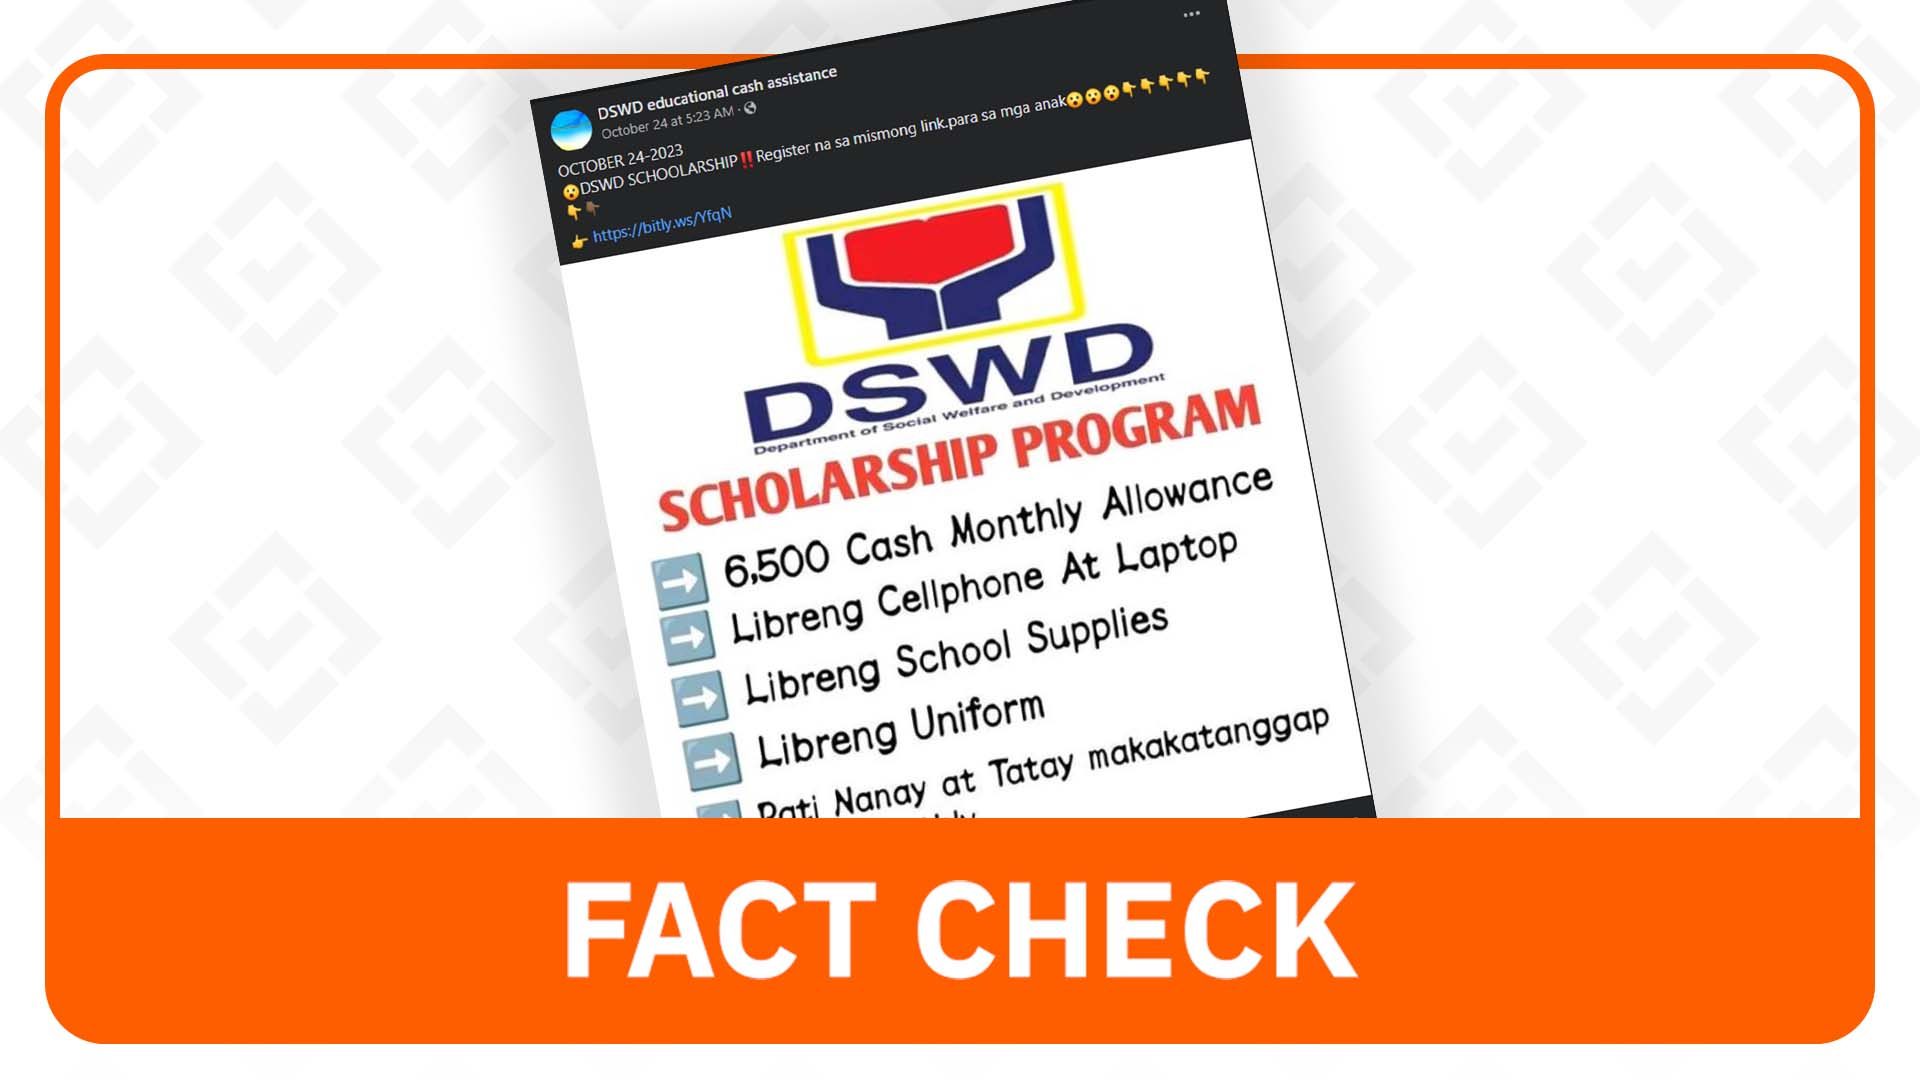 FACT CHECK: DSWD has no scholarship program with P6,500 cash allowance